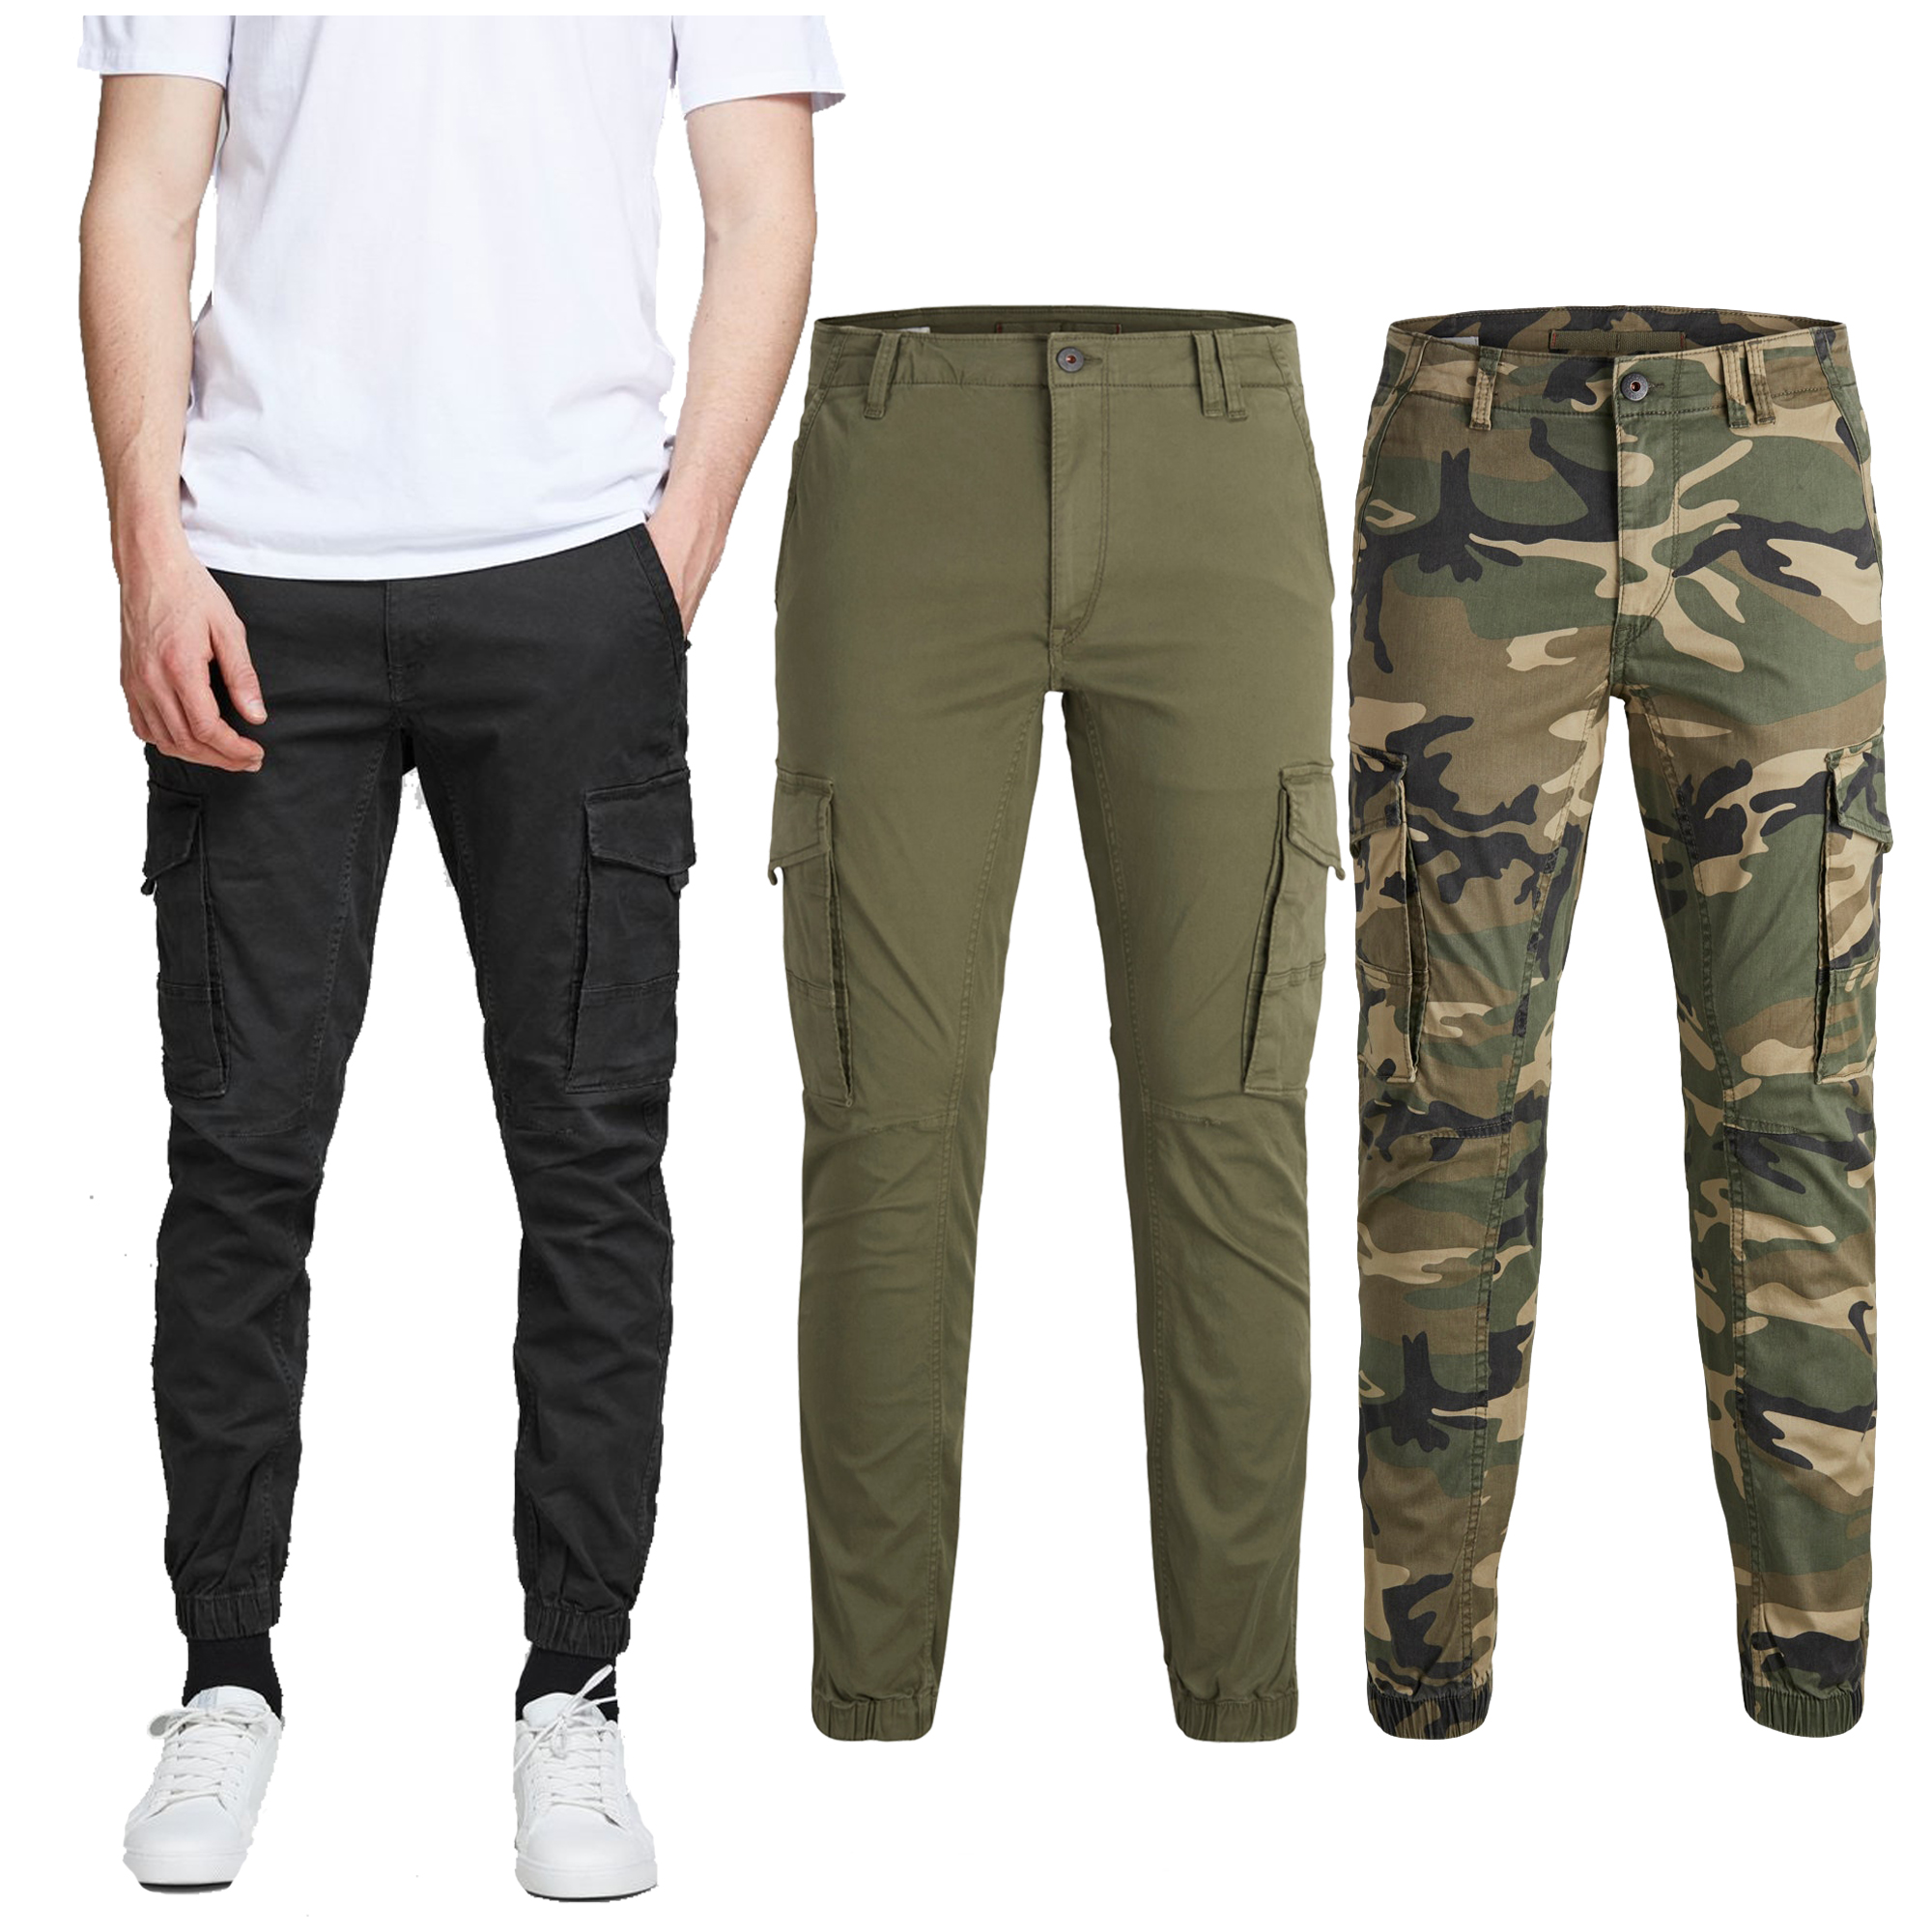 Jack & Jones Mens Cargo Tapered Trousers Loose Fit Combat Camouflage ...